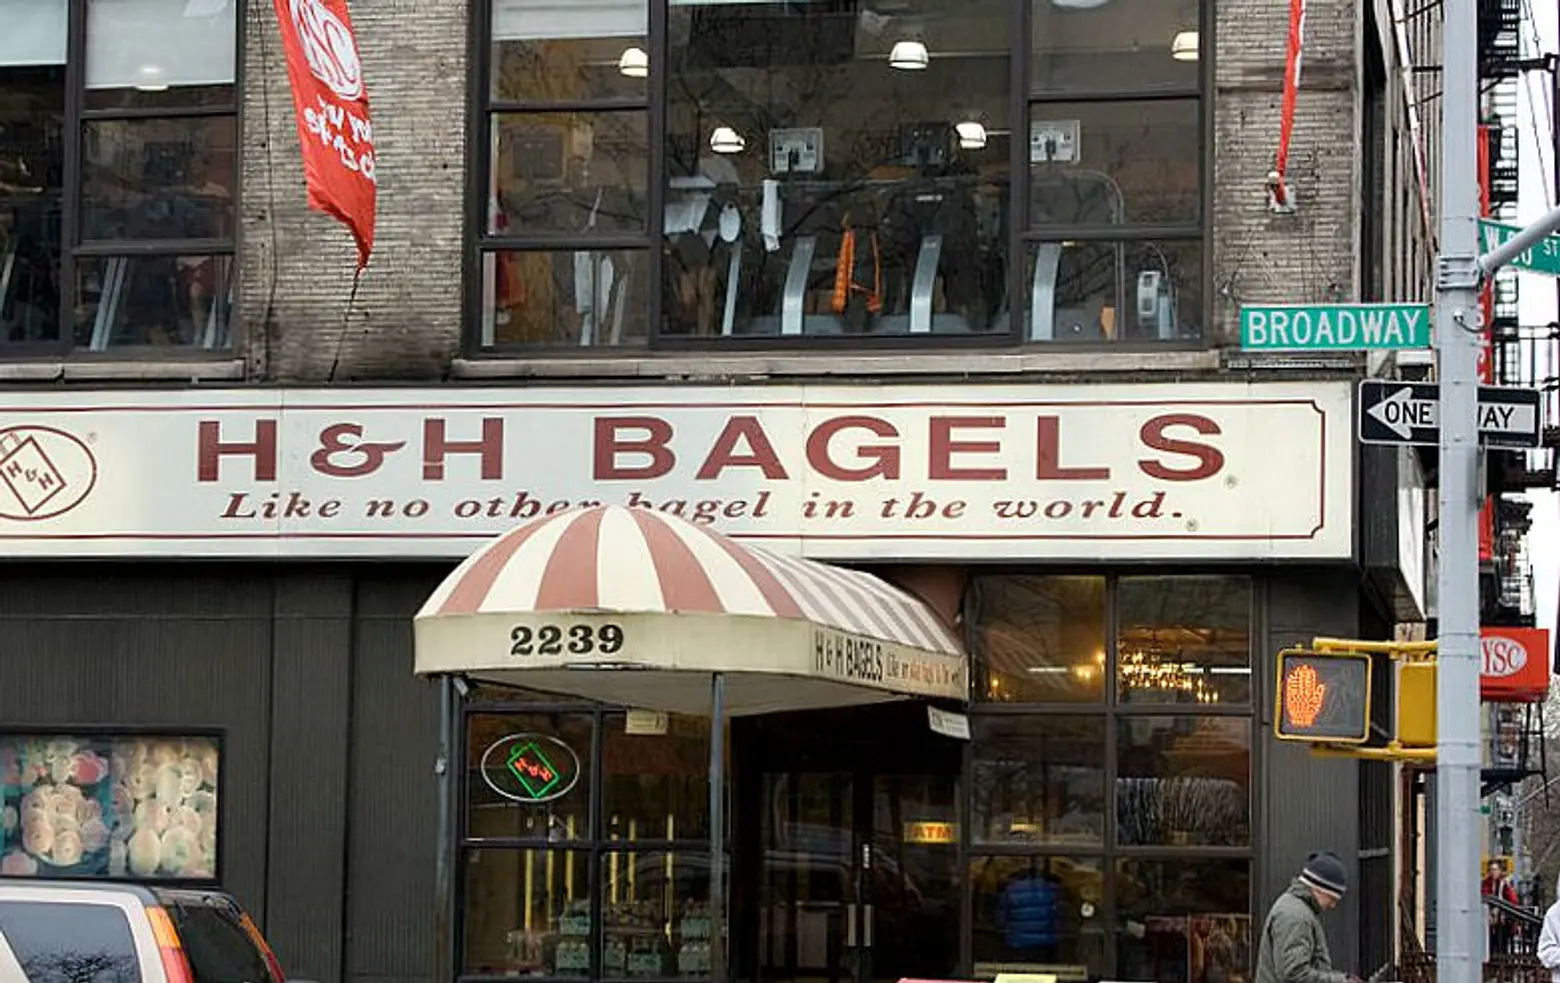 President Obama Misses H&H Bagels; Are You Good Enough to Be a Tennis Line Judge?